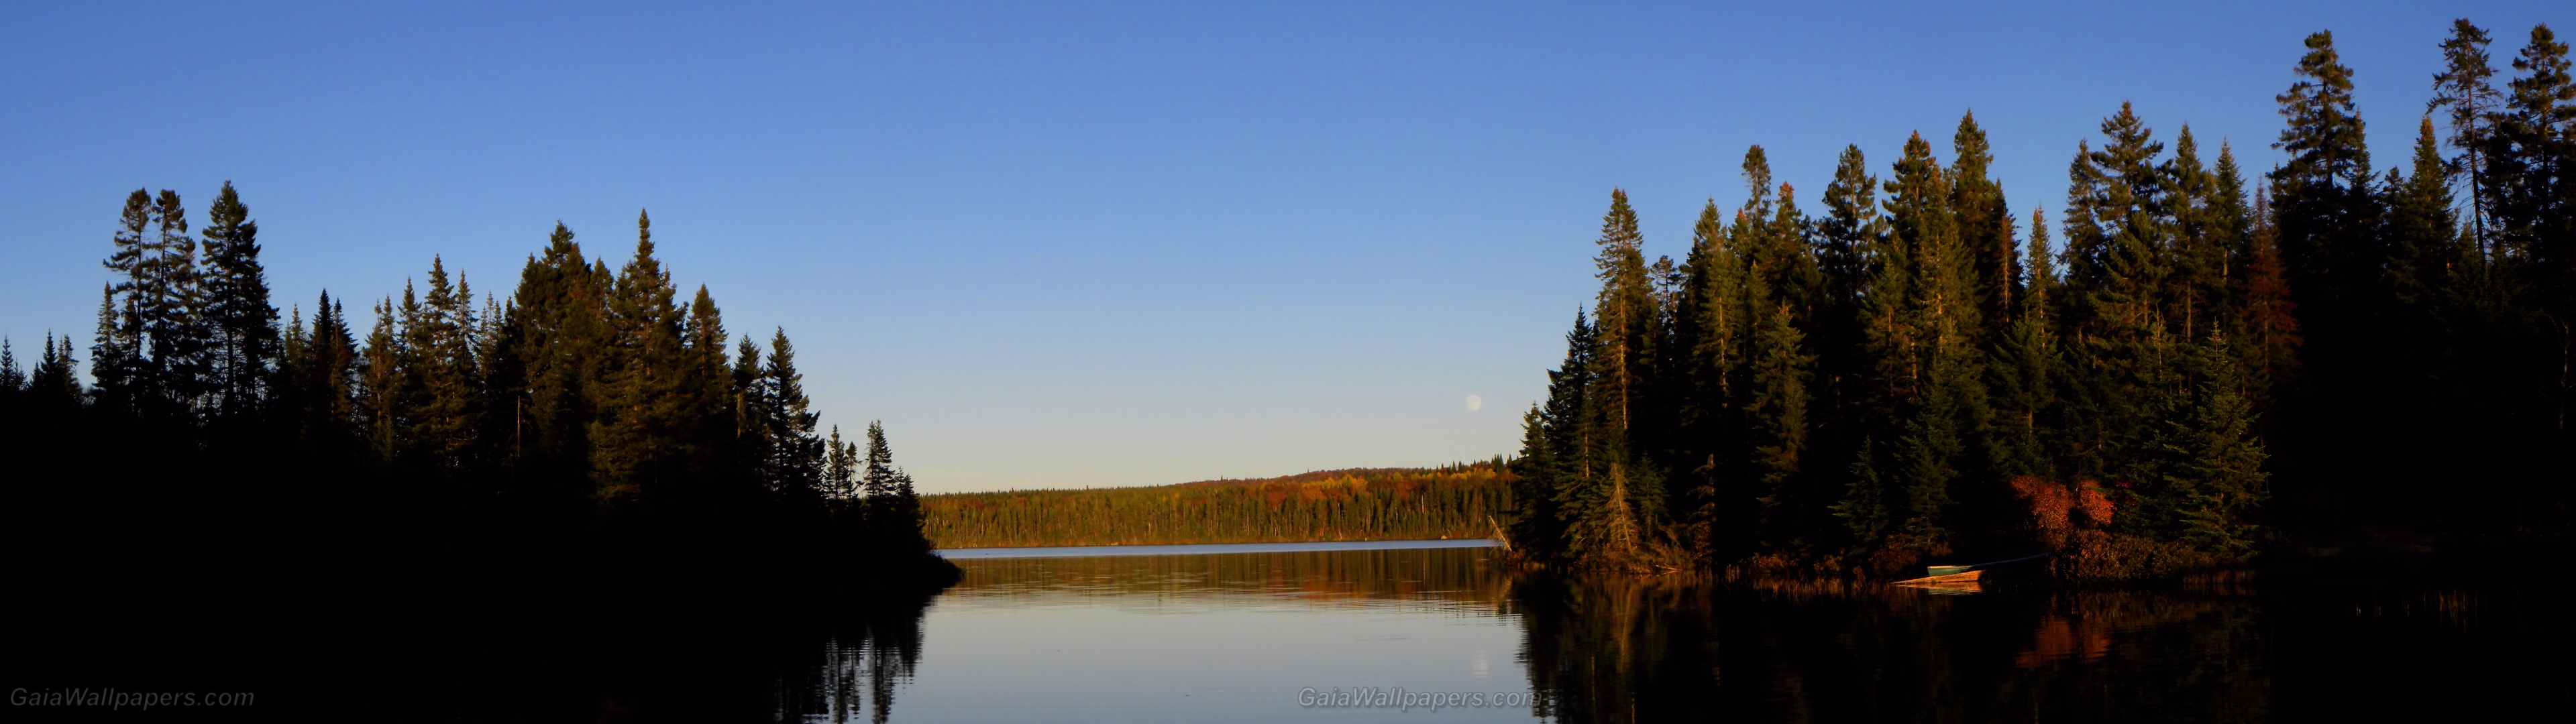 Lake Cinq Doigts at the end of the day - Free desktop wallpapers